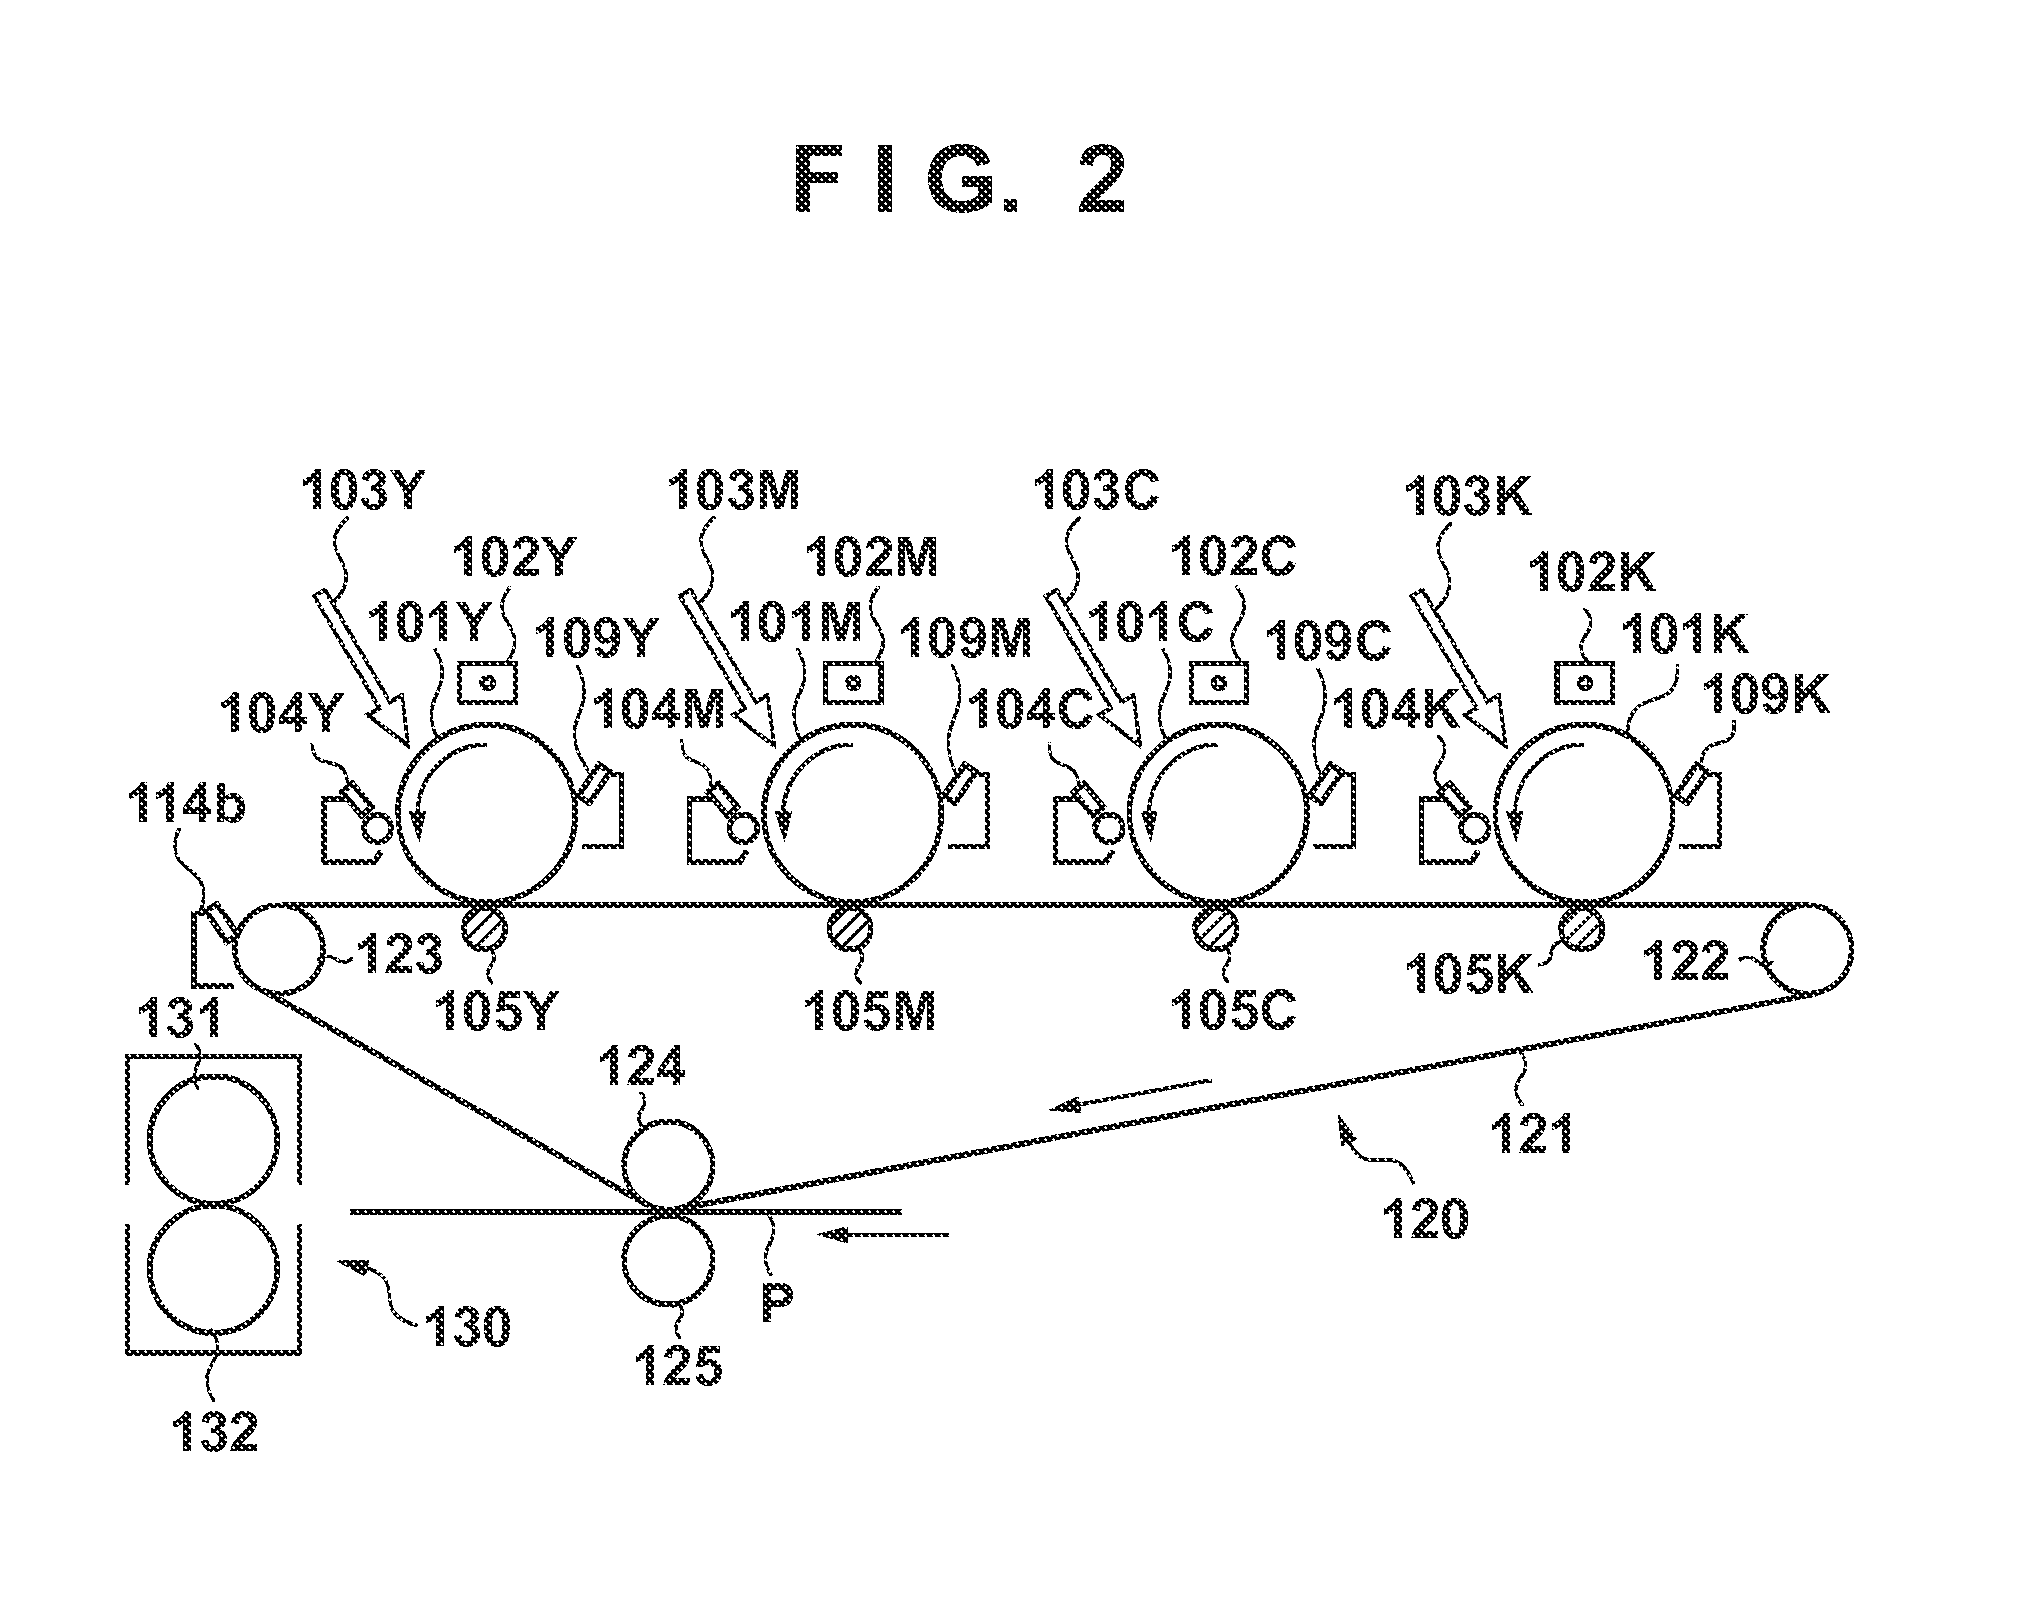 Image forming system and control apparatus